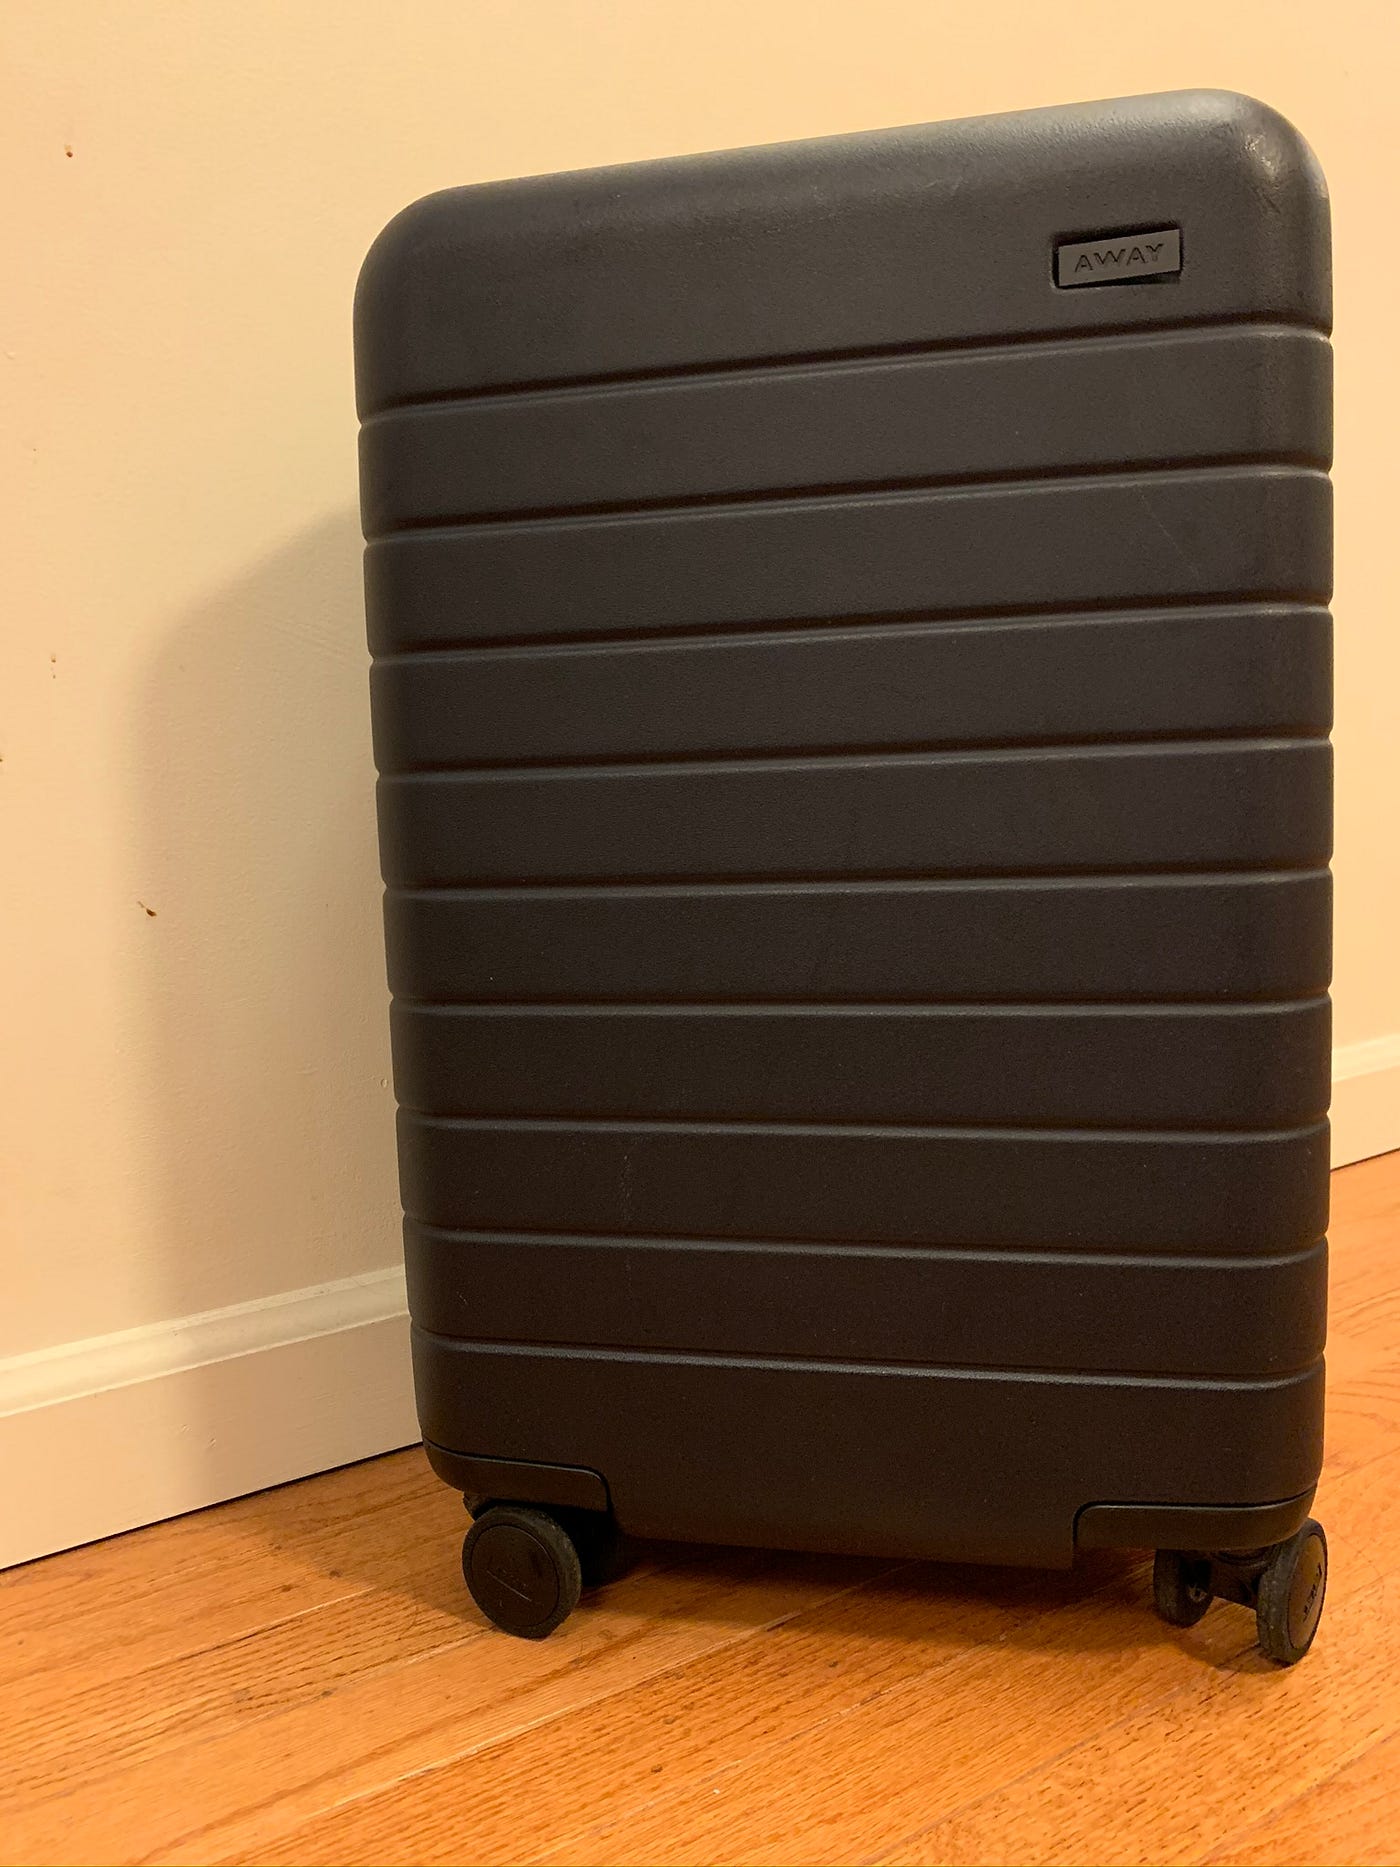 Ode to Paint Pens…or How I Transformed a Boring Away Suitcase (DIY